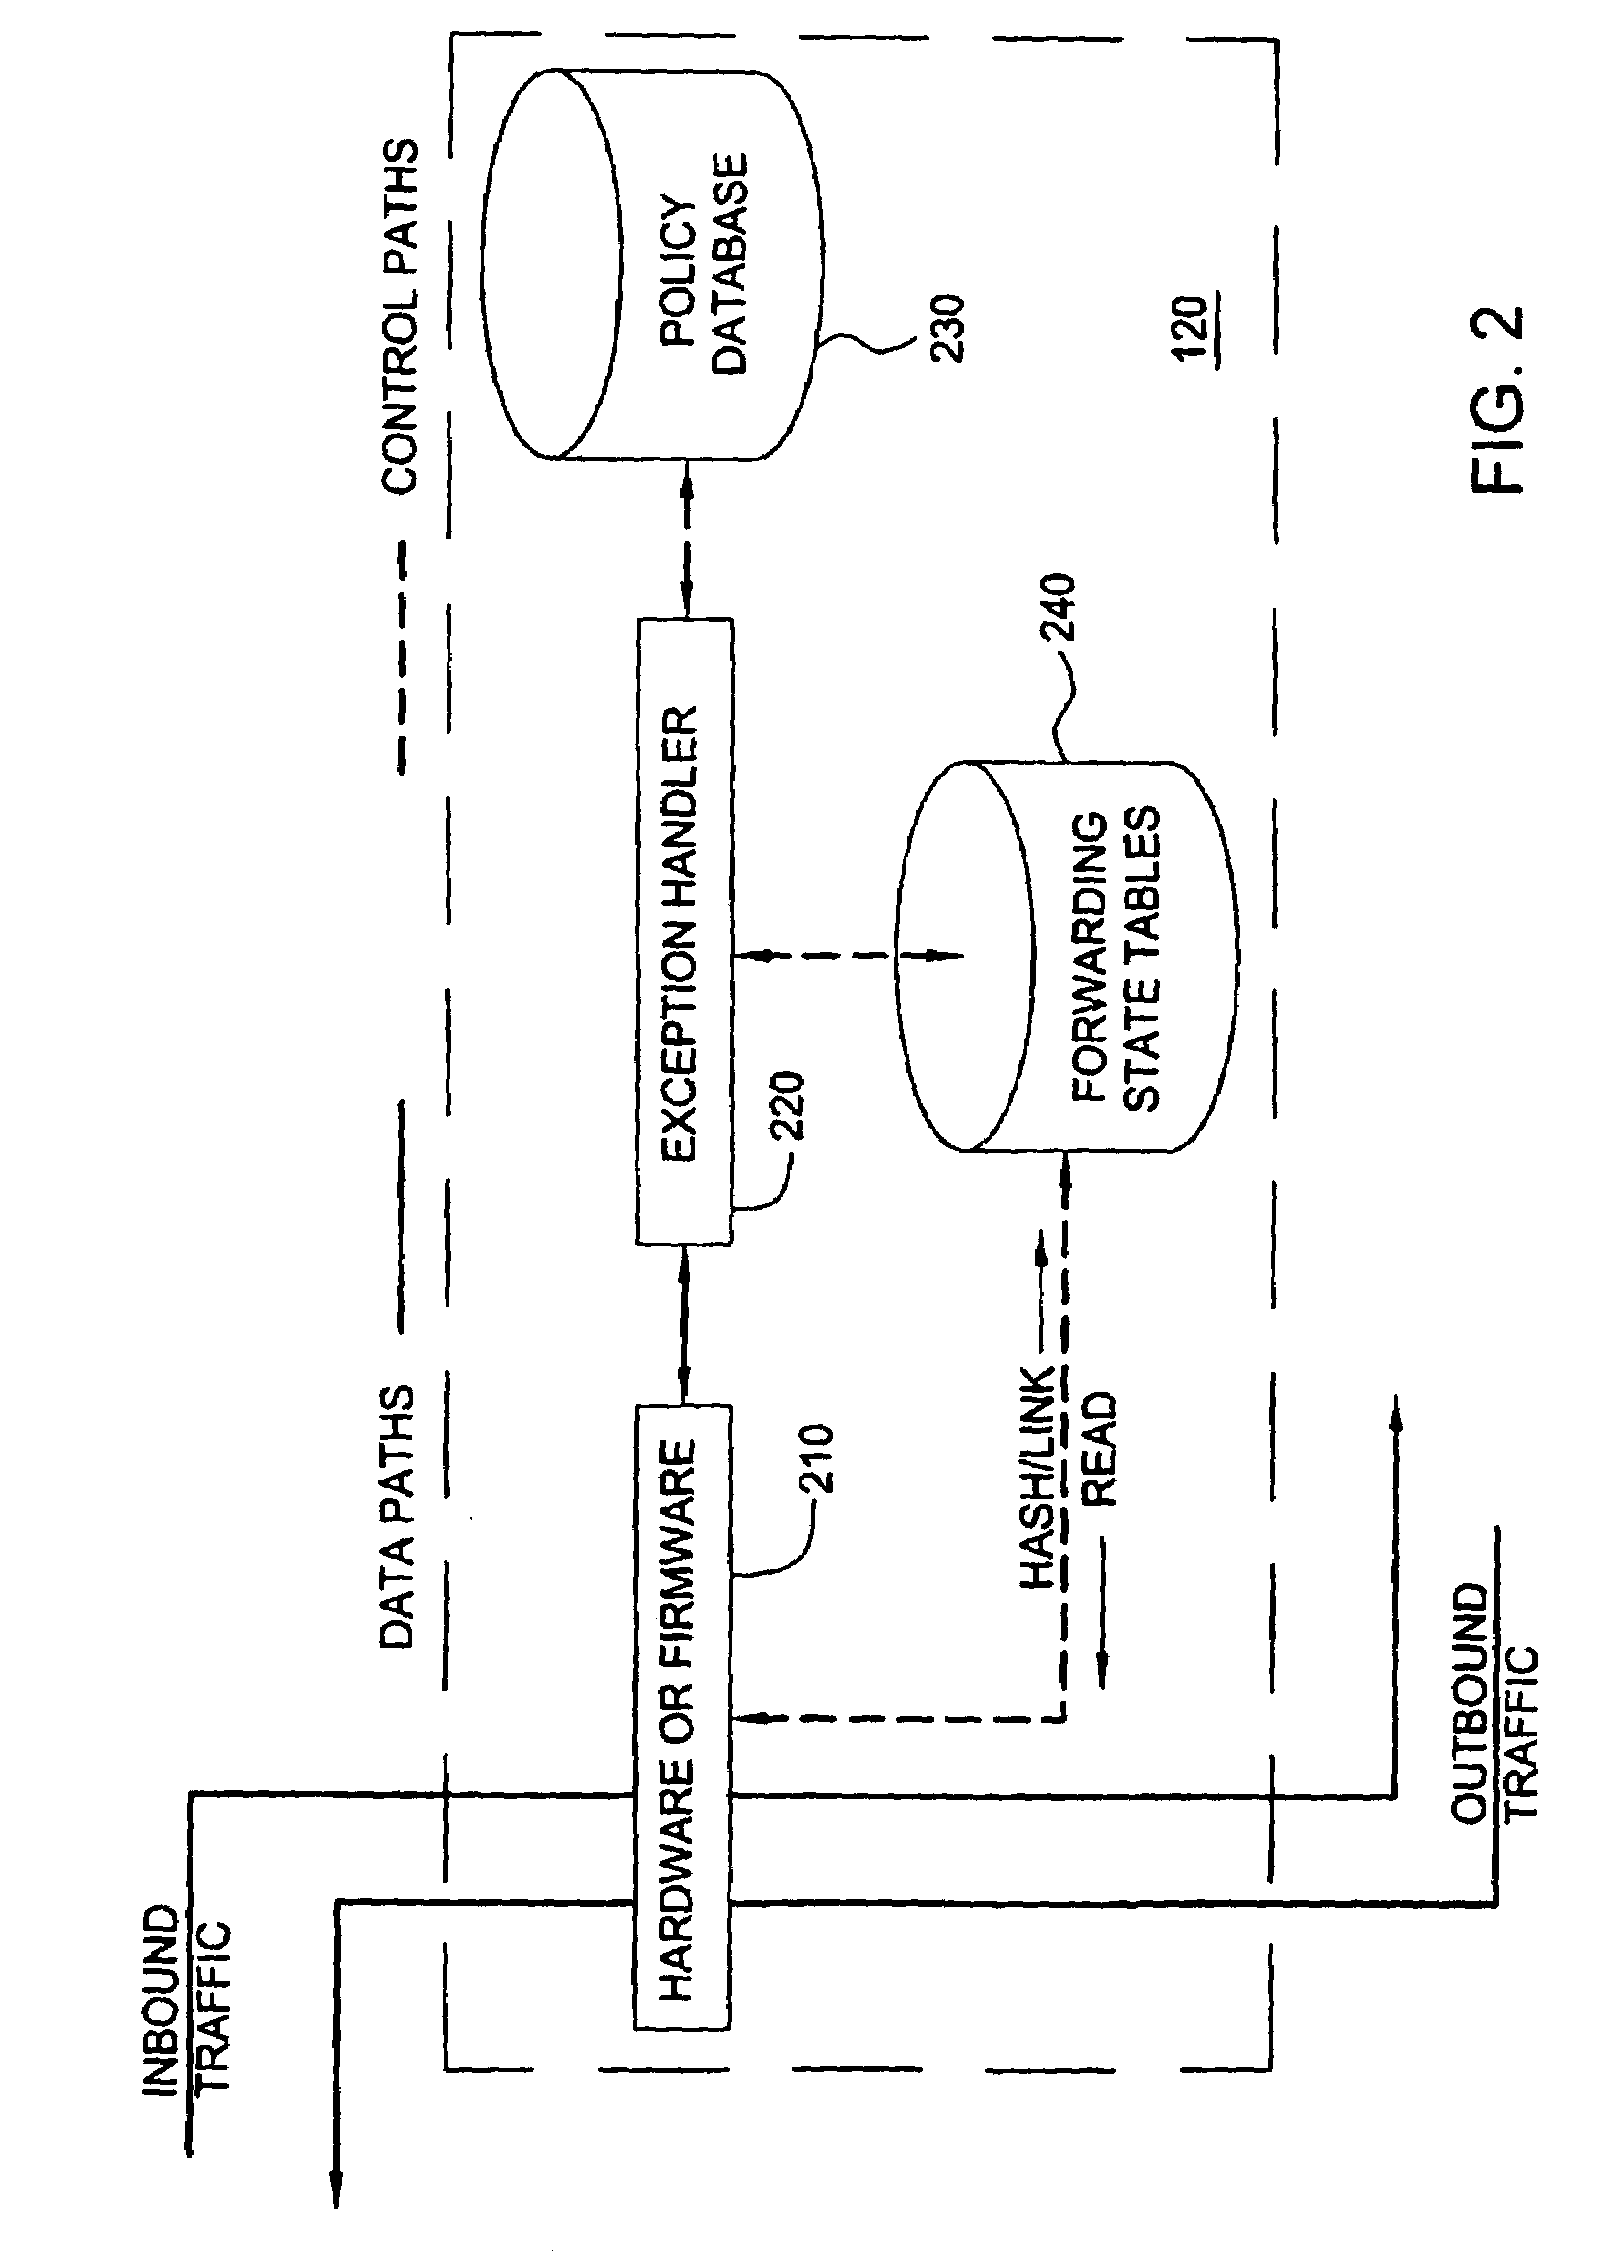 Method and apparatus for deflecting flooding attacks